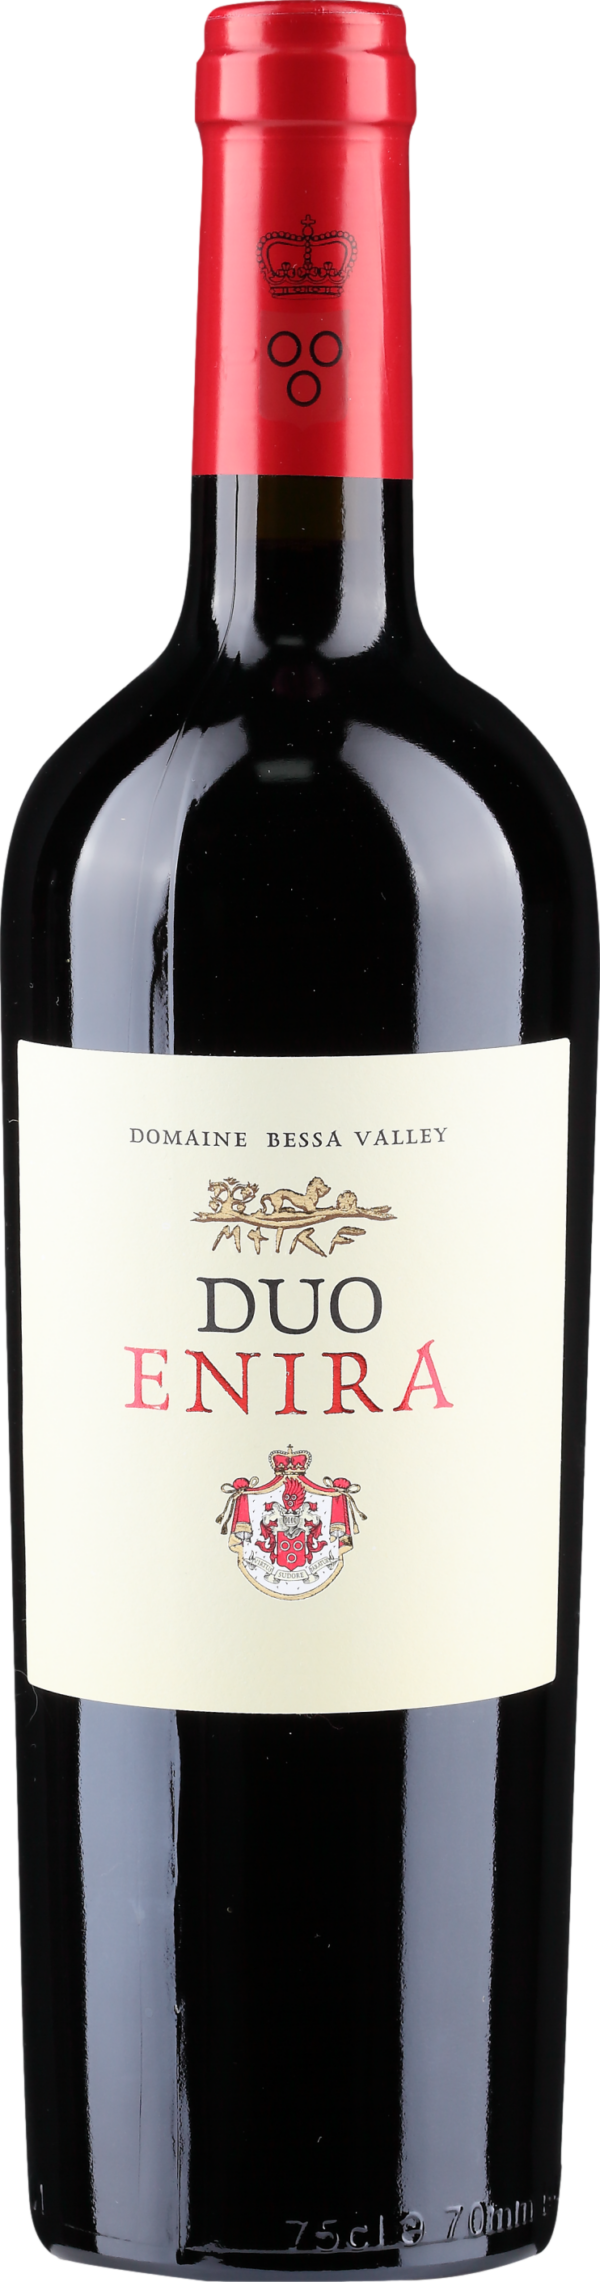 Product image of Bessa Valley Enira Duo 2020 from 8wines